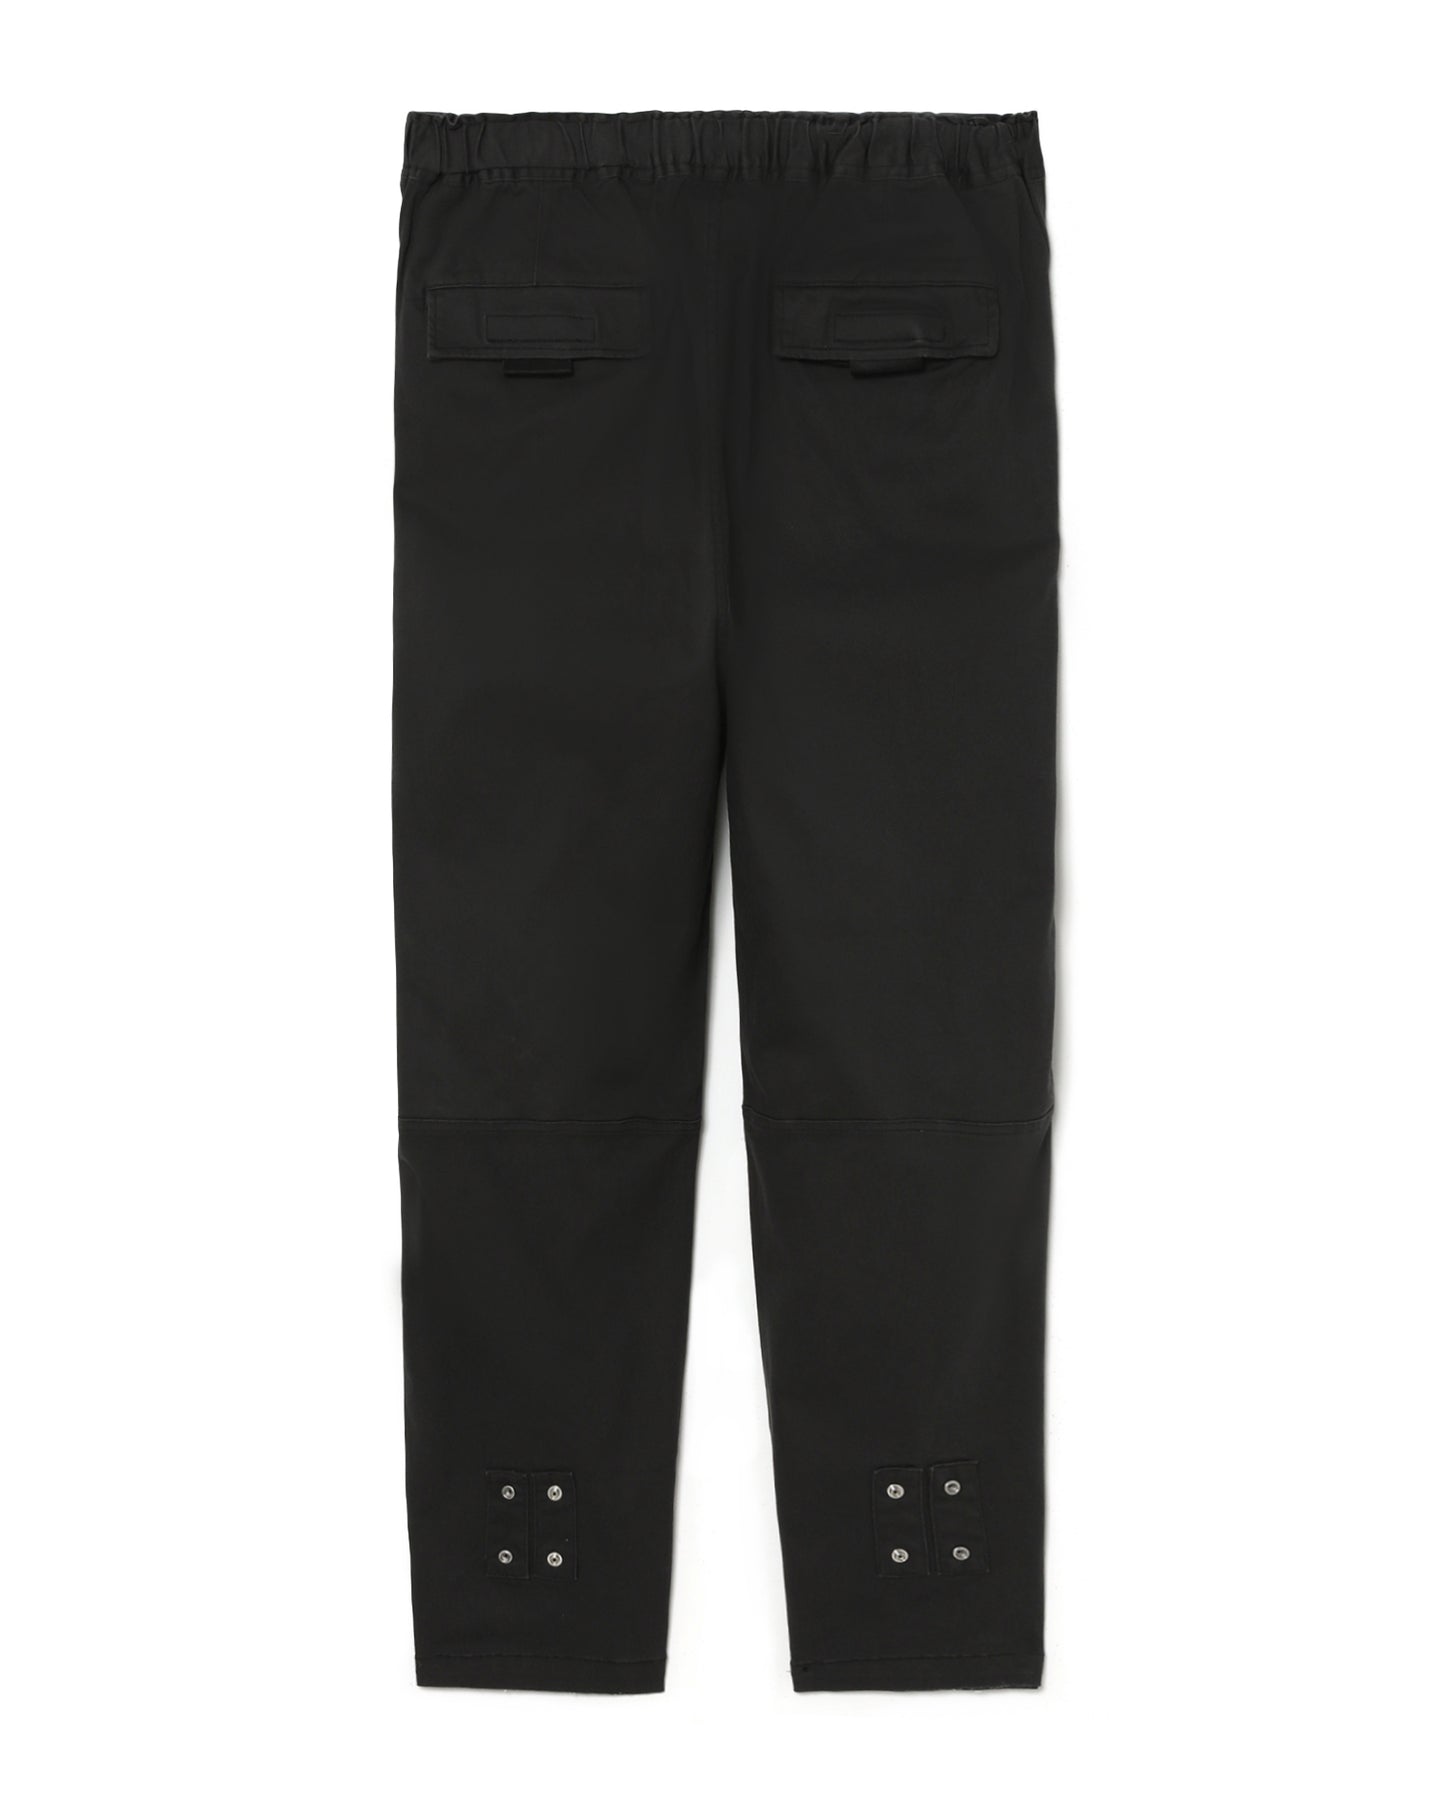 Izzue Mens Pant in Charcoal Color